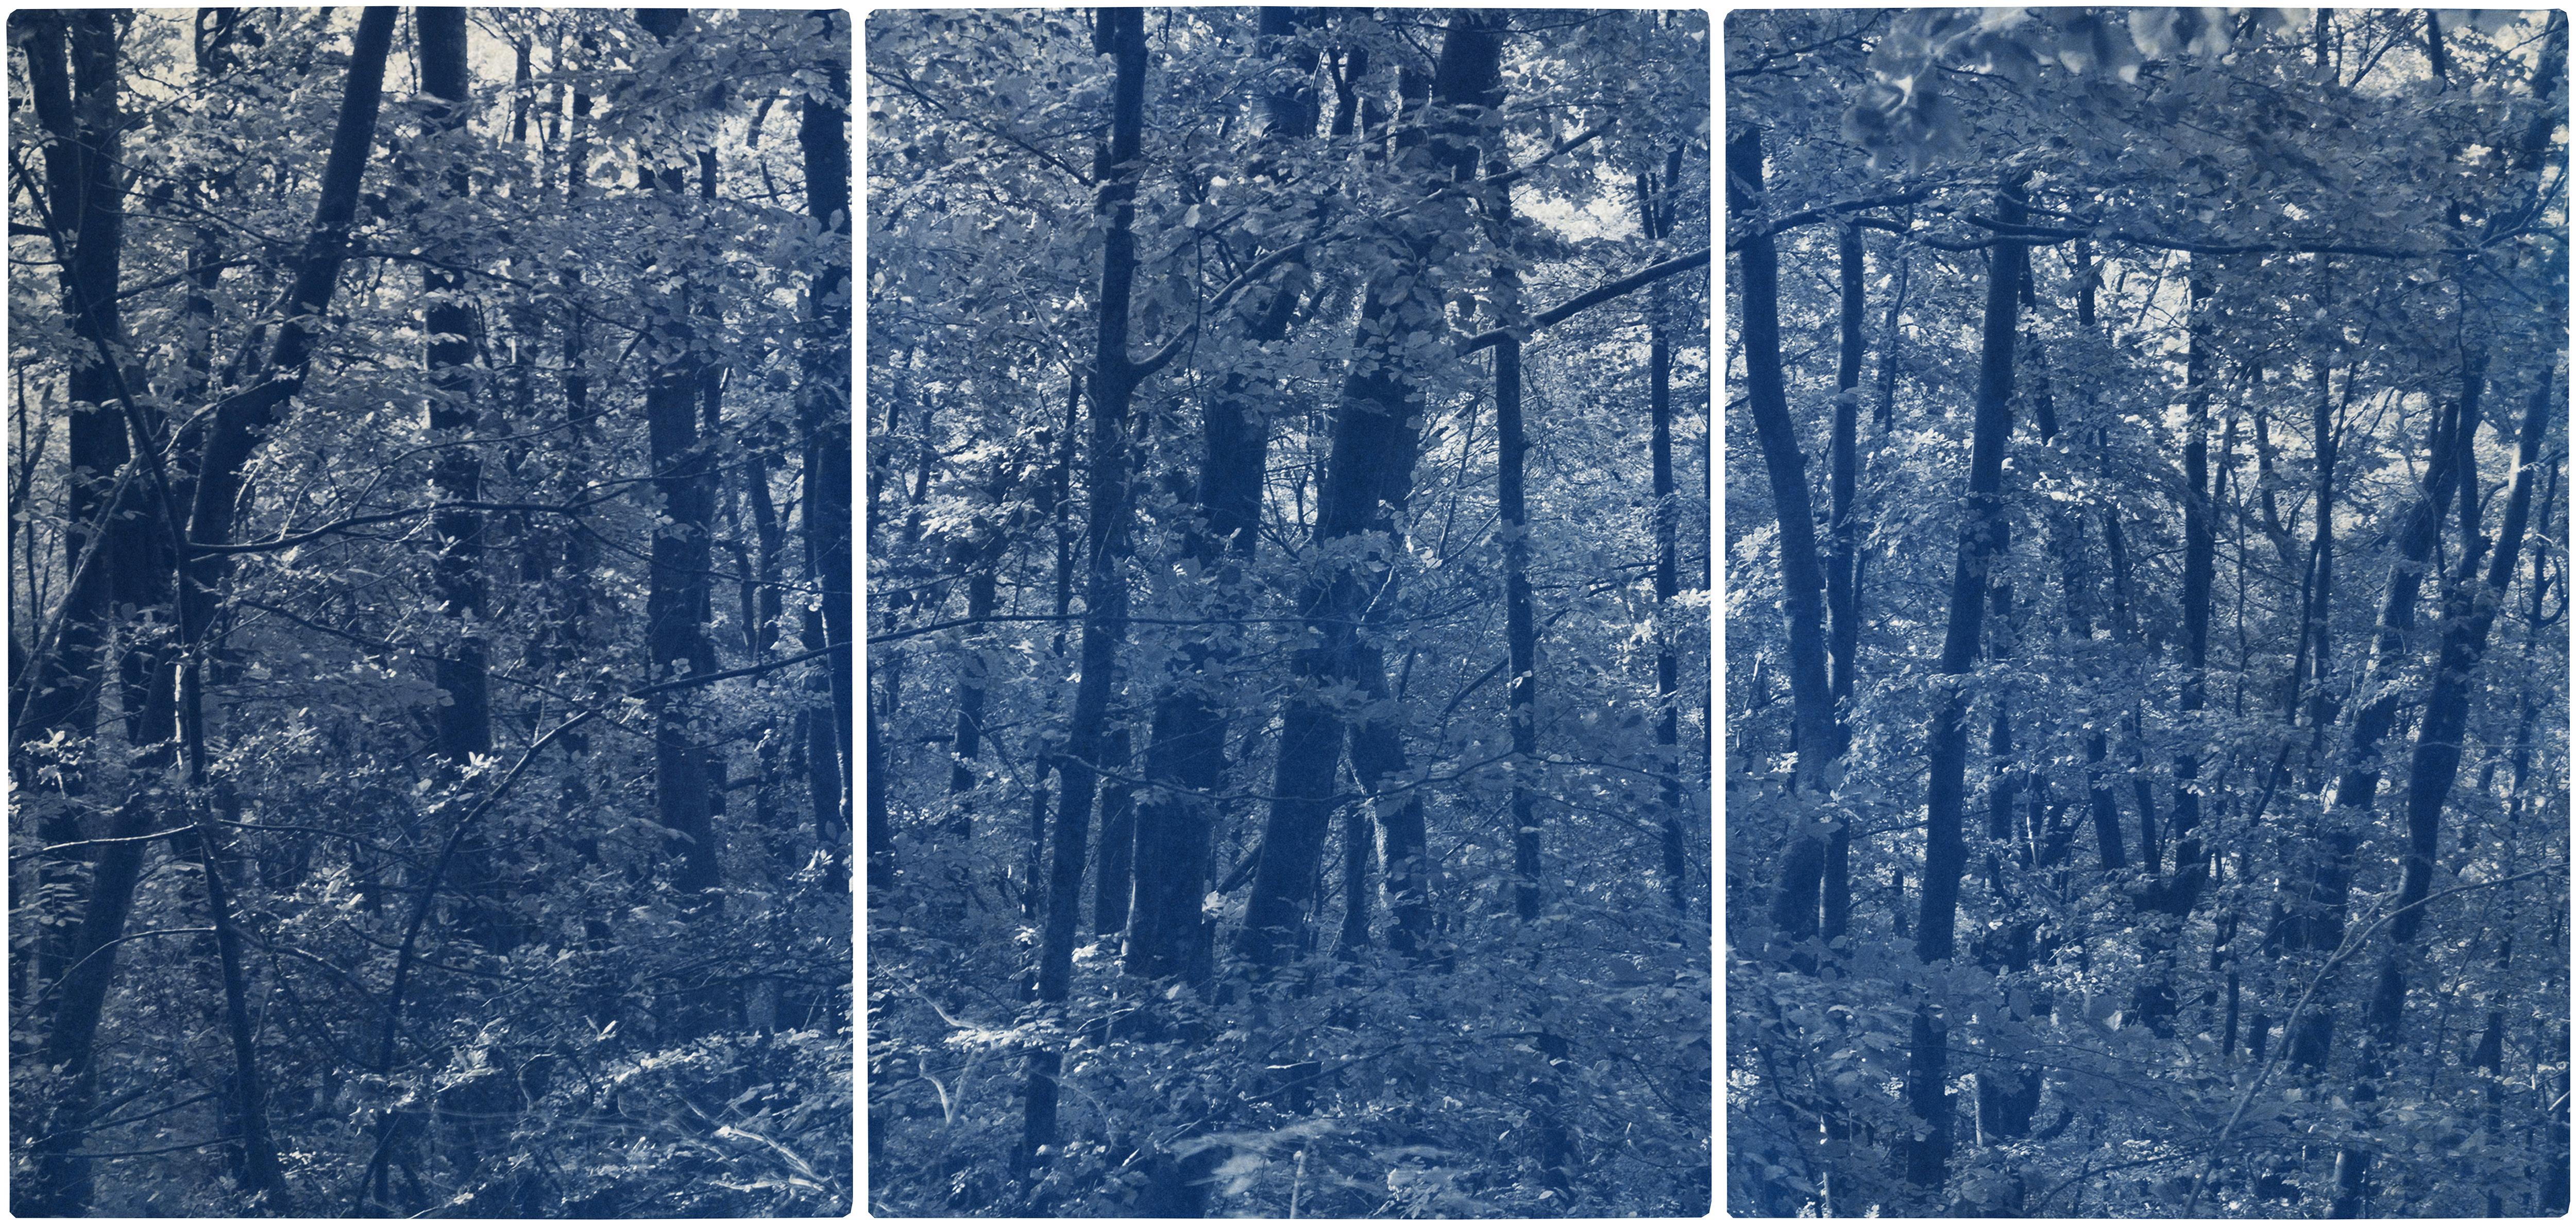 Walking in the Woods, Forest Landscape Cyanotype Print, Limited Edition, Blue